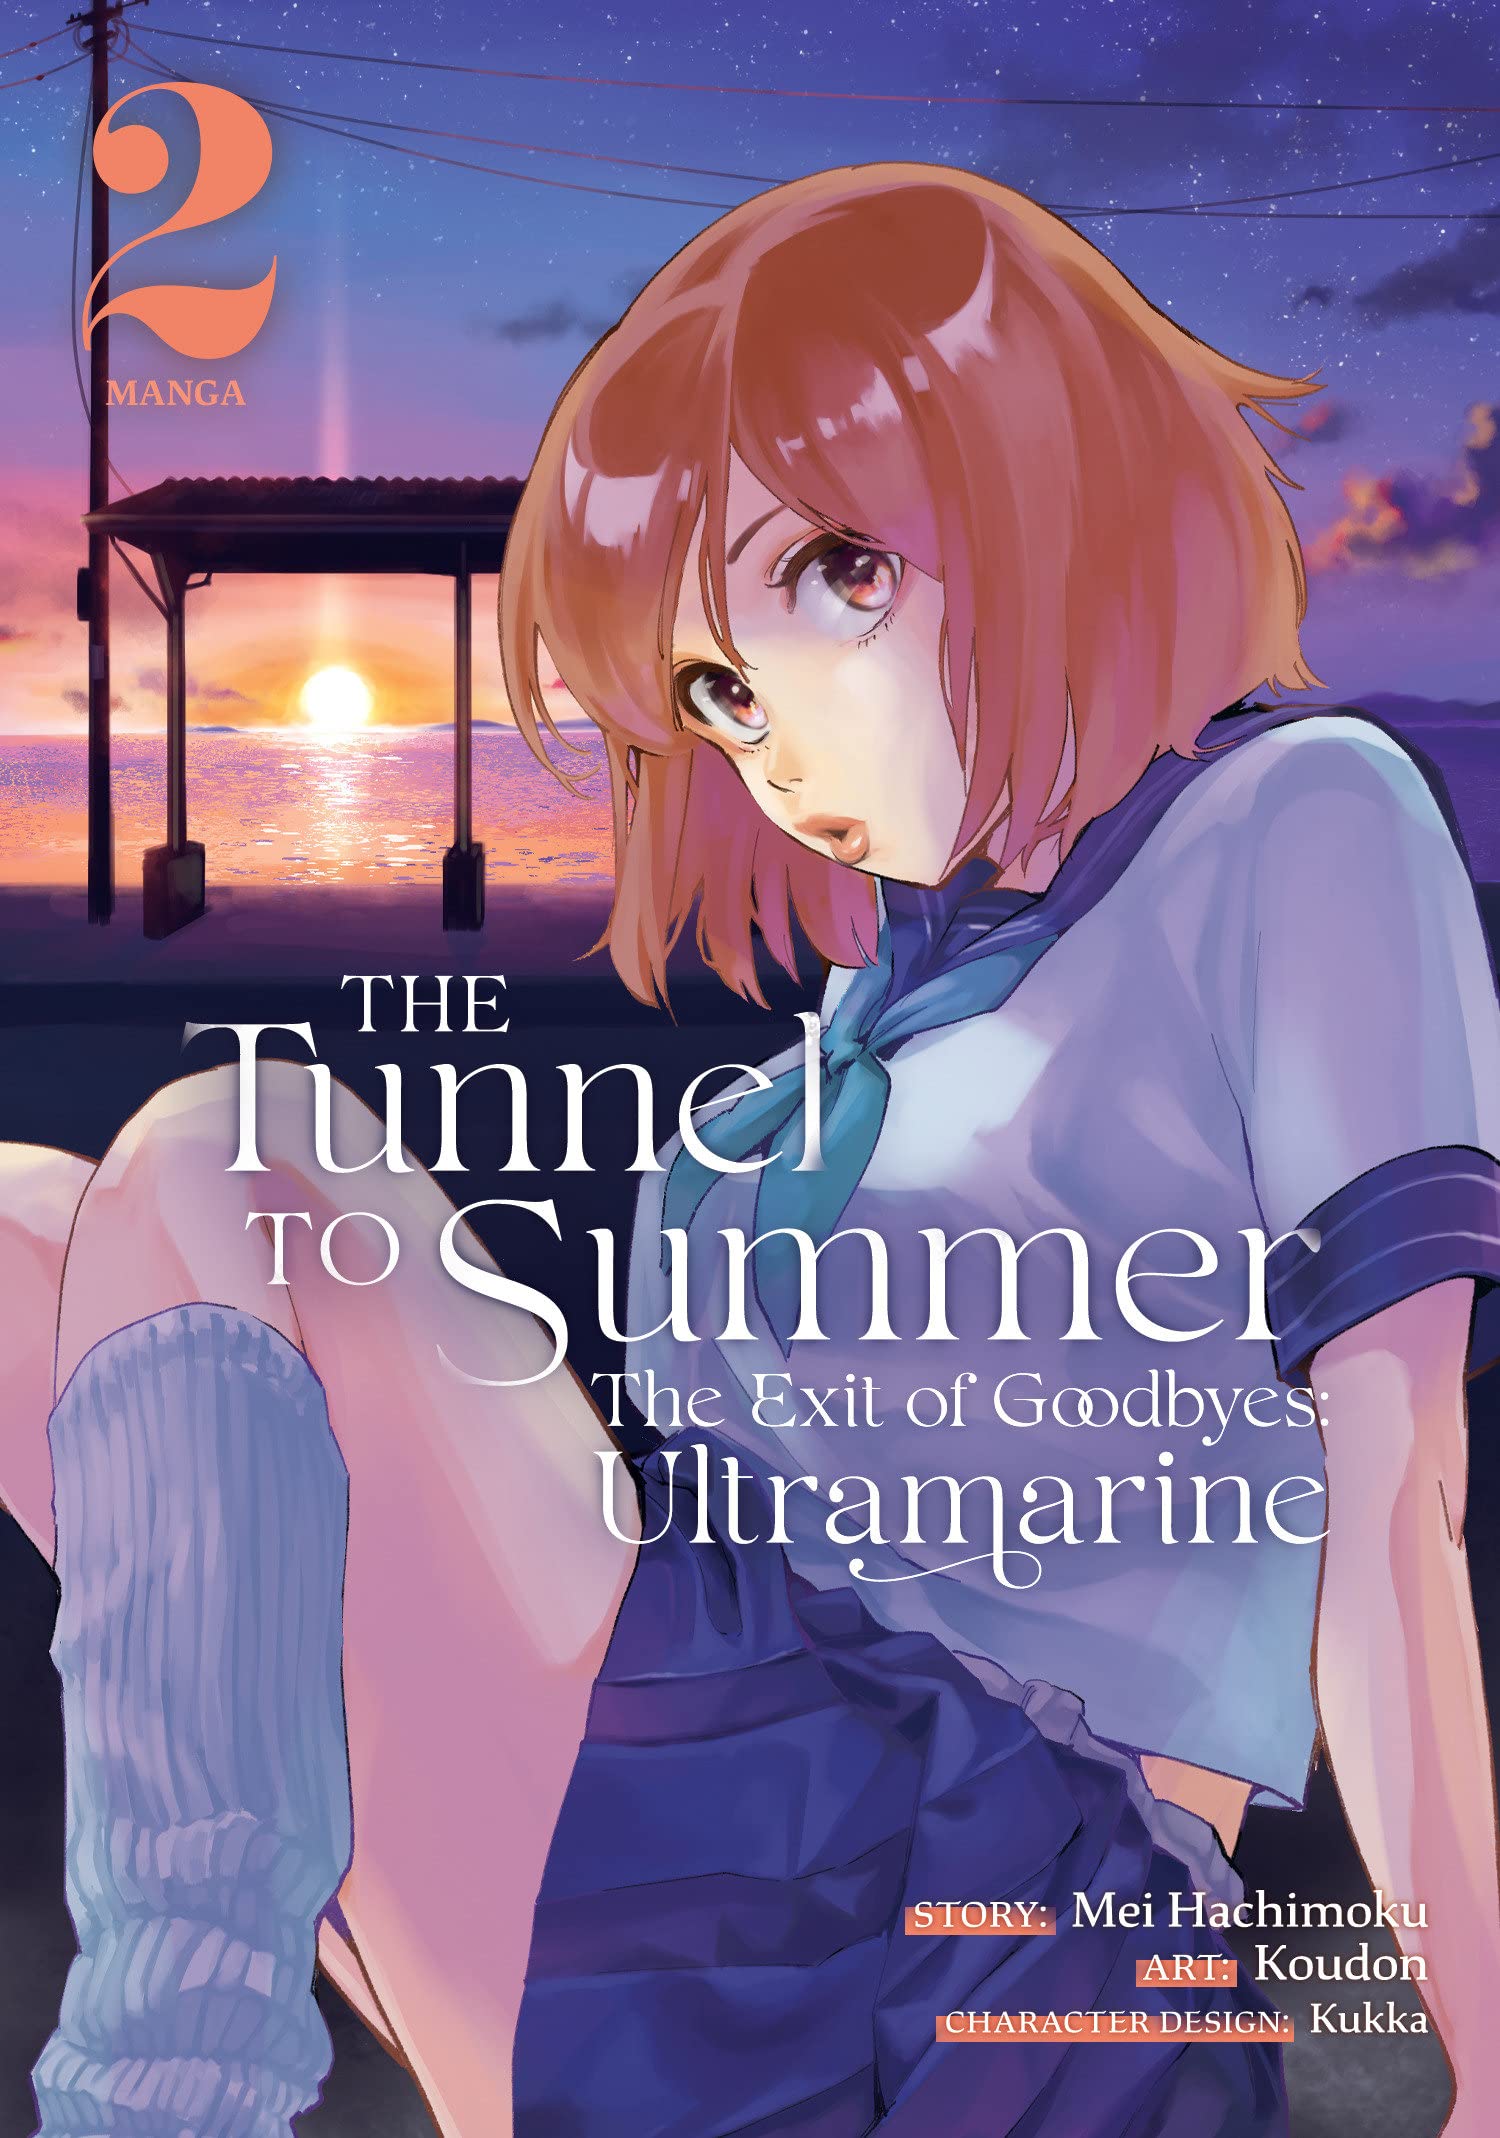 The Tunnel to Summer, the Exit of Goodbyes: Ultramarine (Manga) Vol. 02